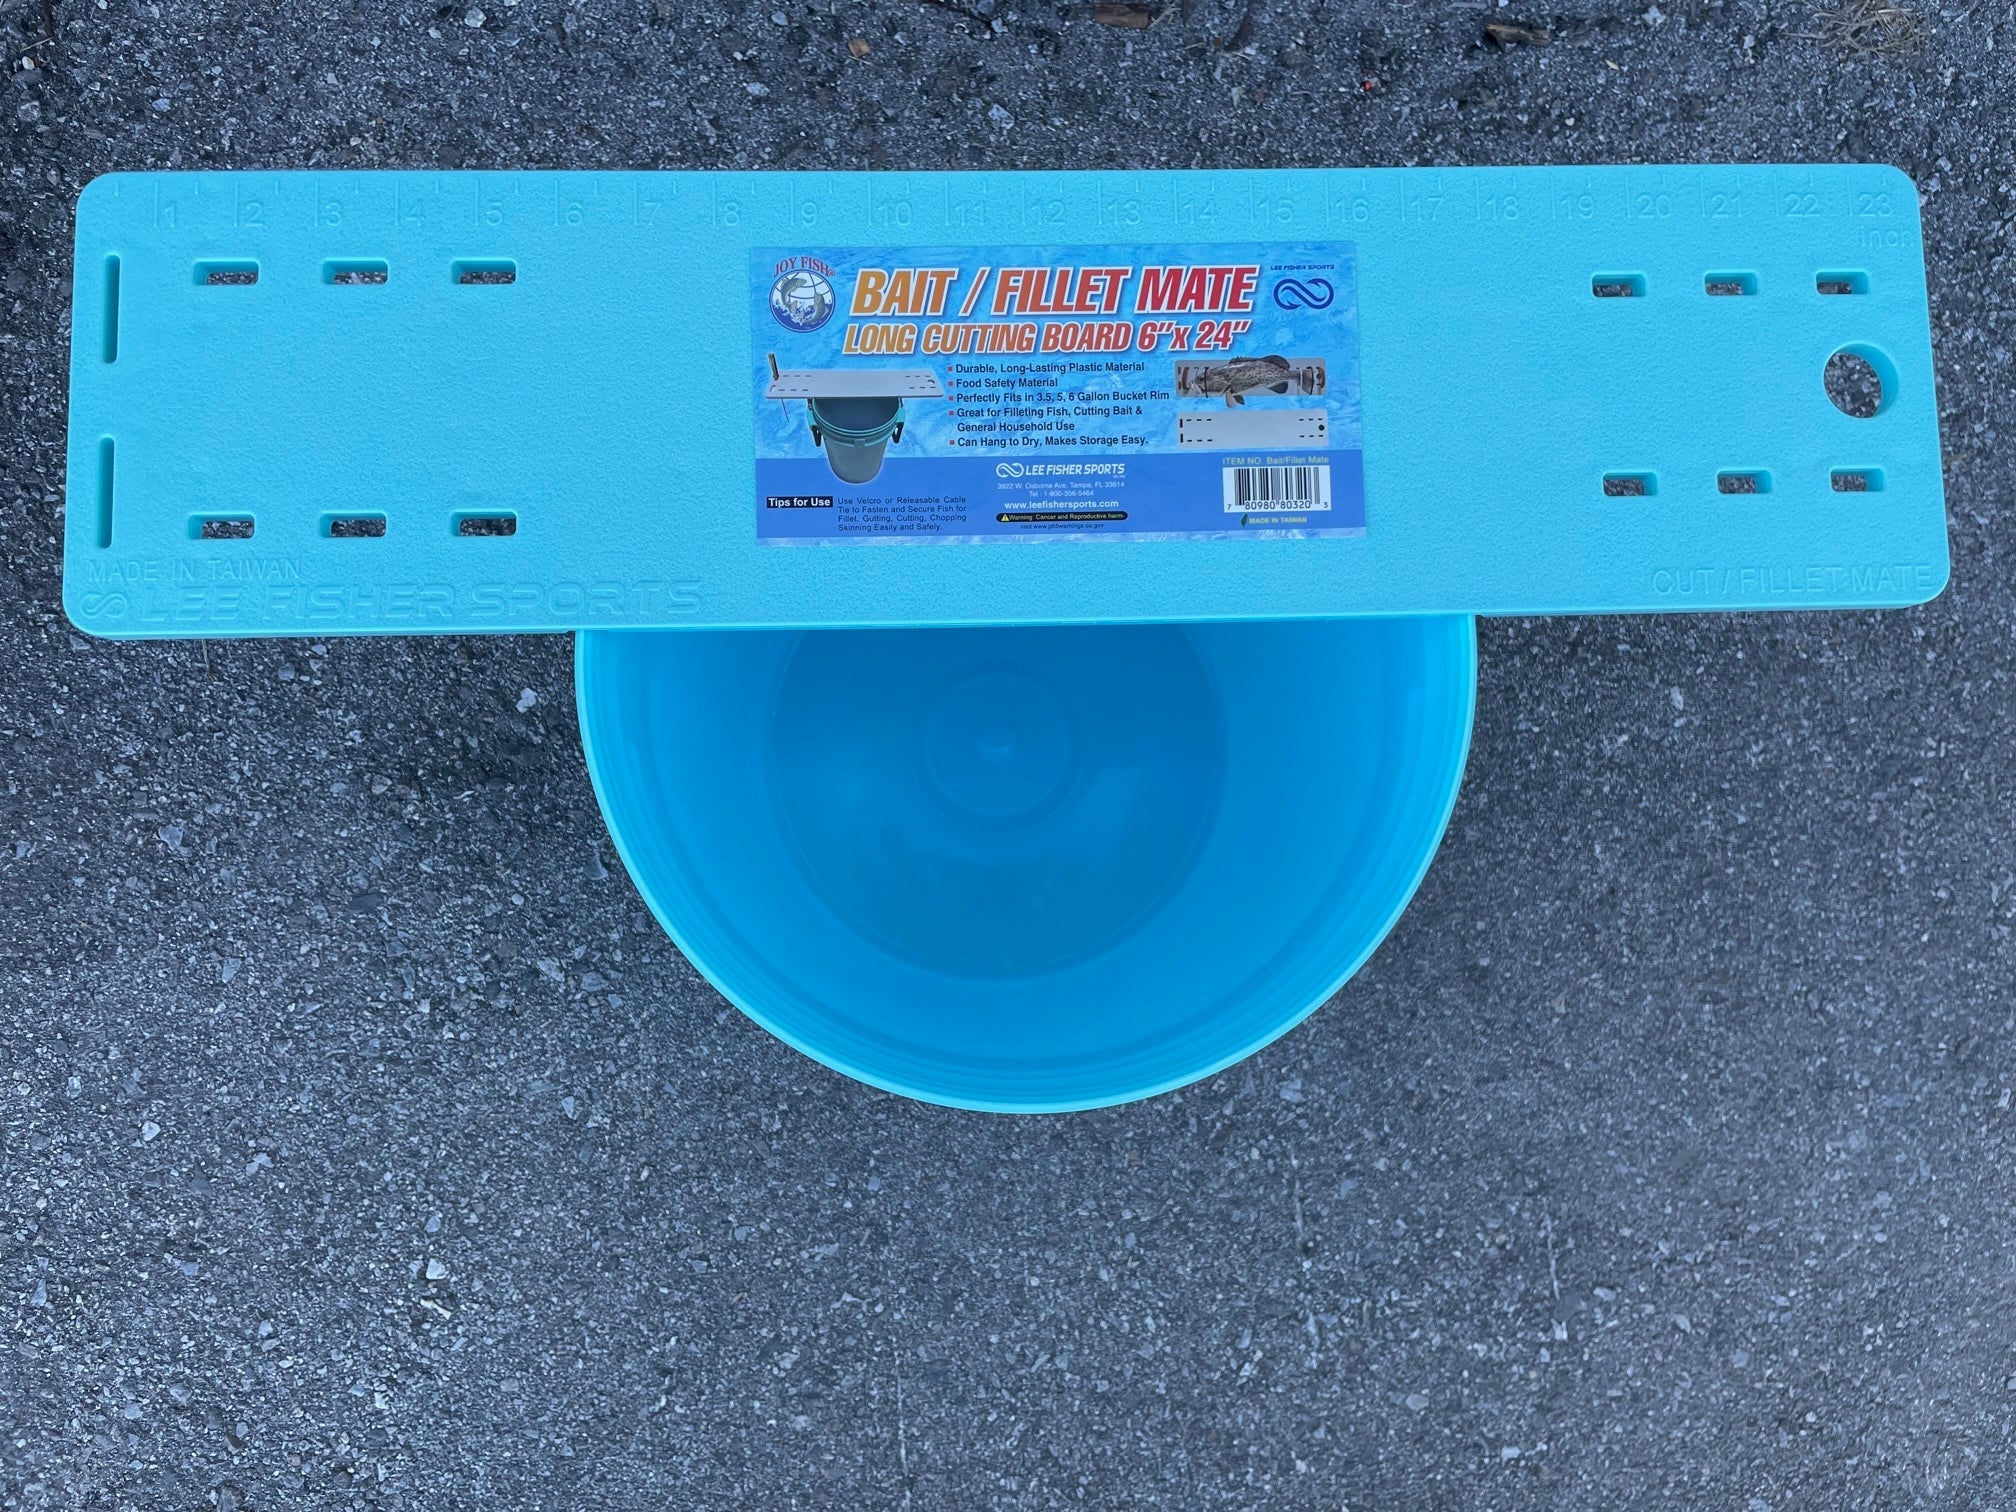 Lee Fisher Sports 5 Gallon iSmart Bucket (Rope Handle) with Essential Top  (Aqua)